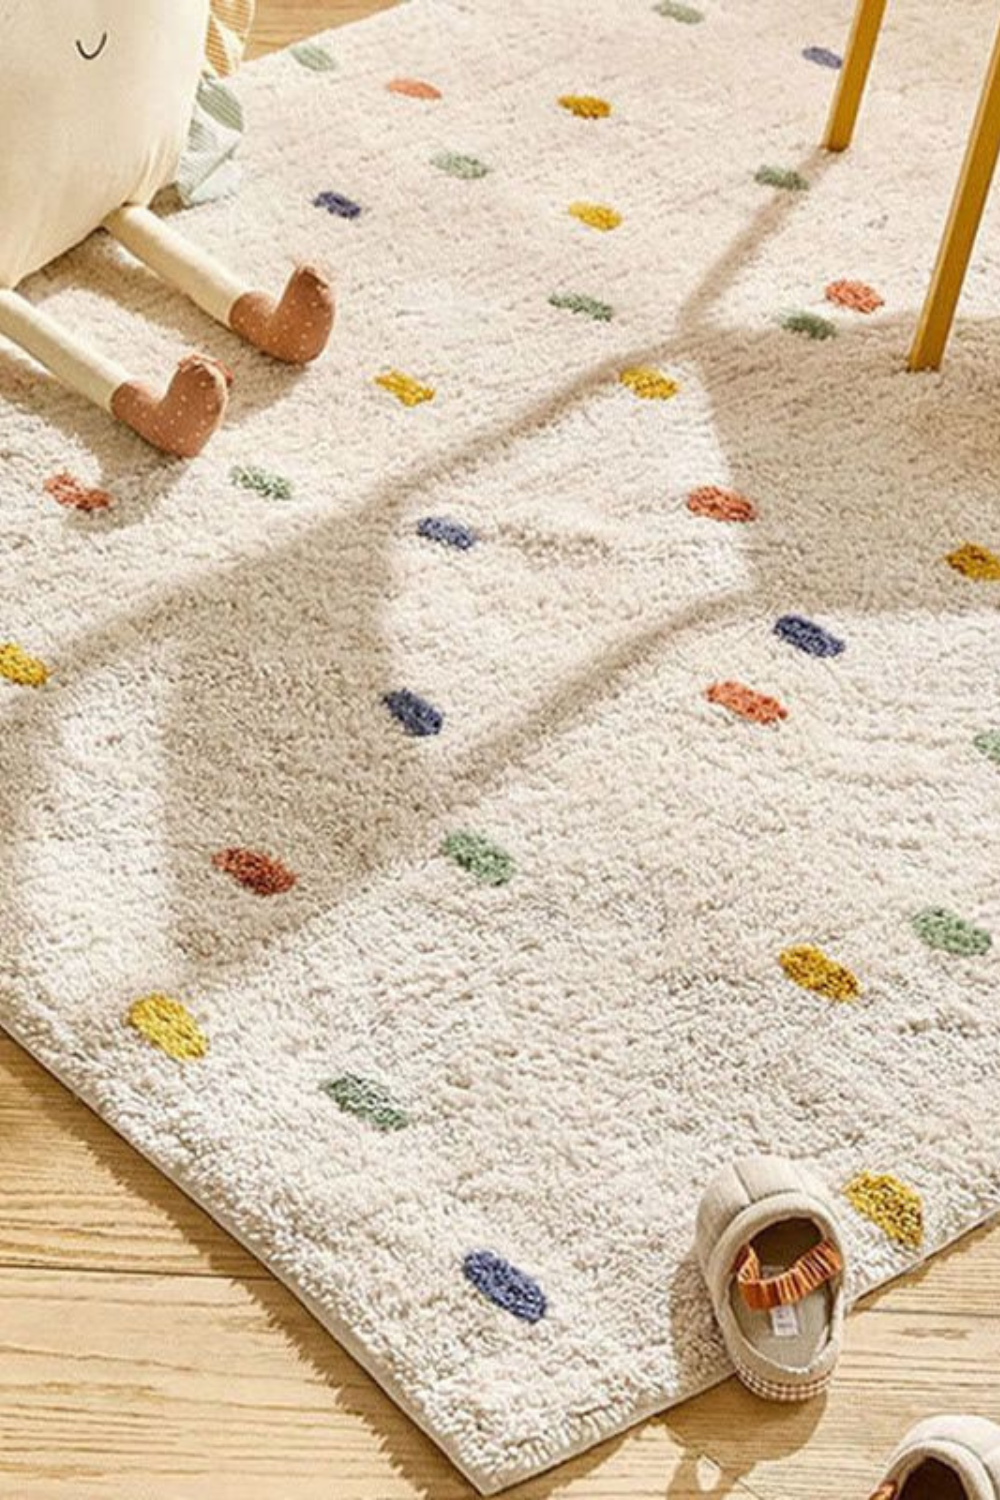 Non-Toxic Area Rugs for Nursery: Providing a Safe and Comfortable Space for Crawling Babies